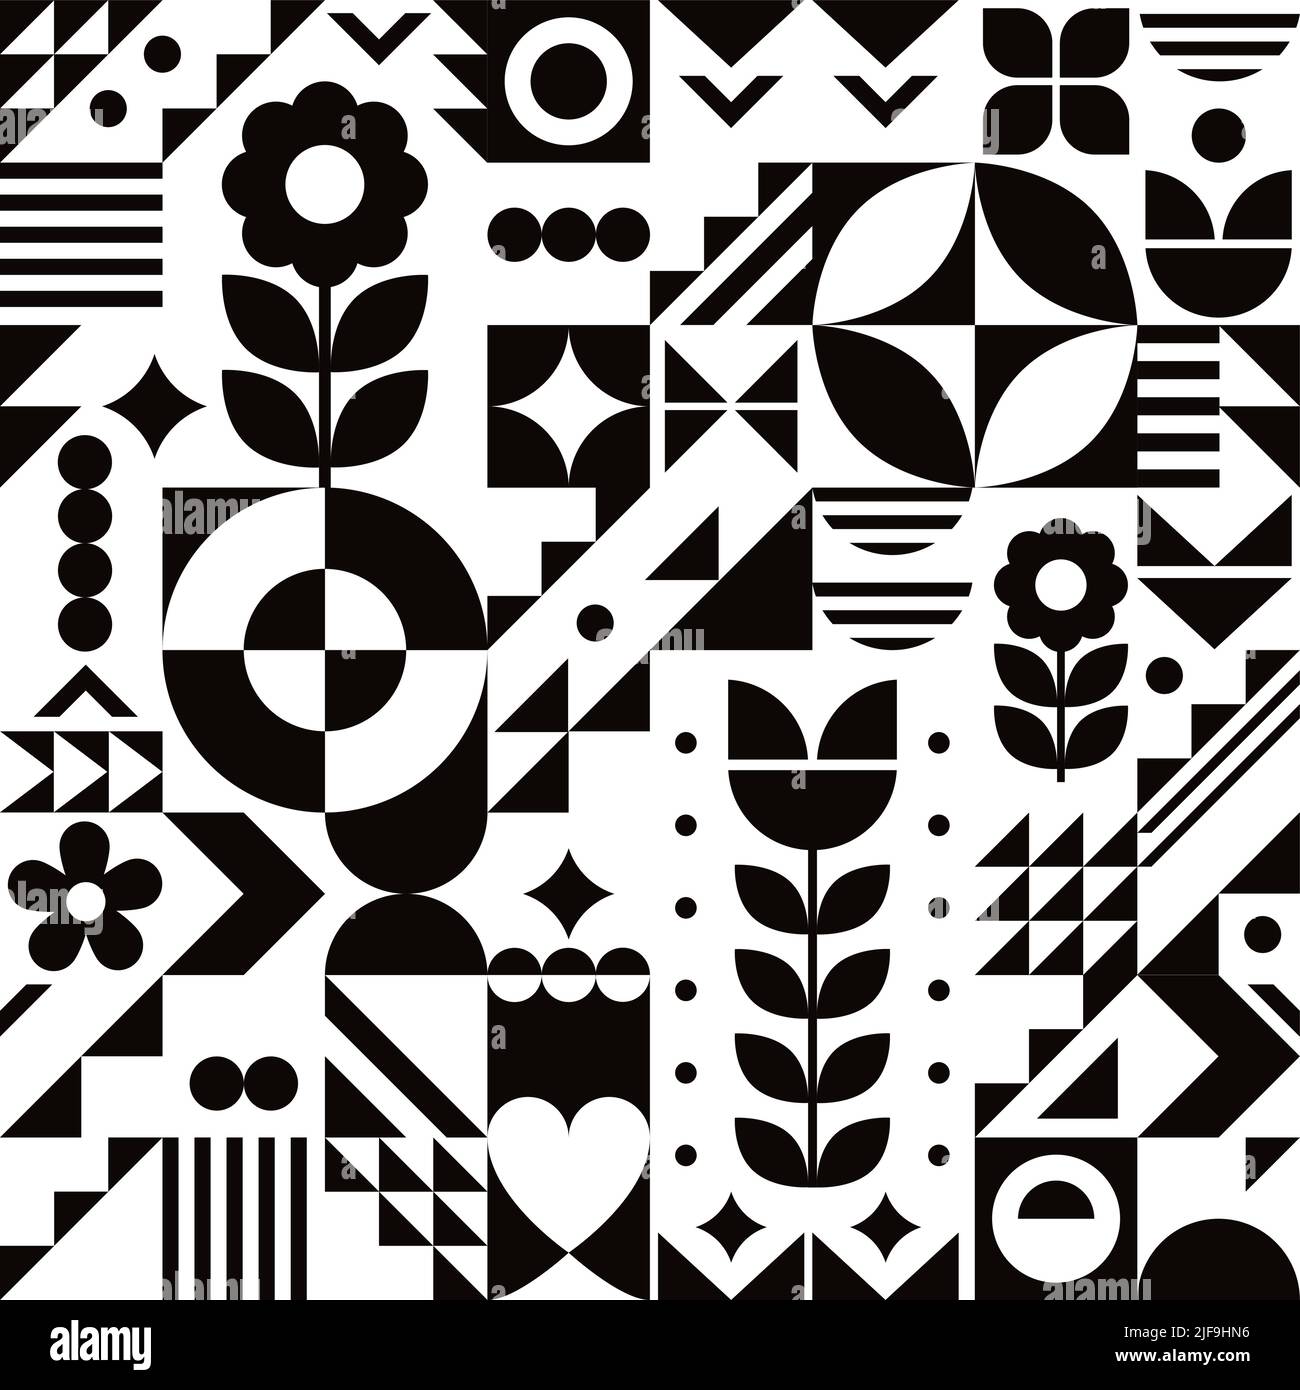 Bauhaus style cool geometric vector seamless pattern in black and white with flowers, abstract modern design perfect for wallpaper or textile, fabric Stock Vector